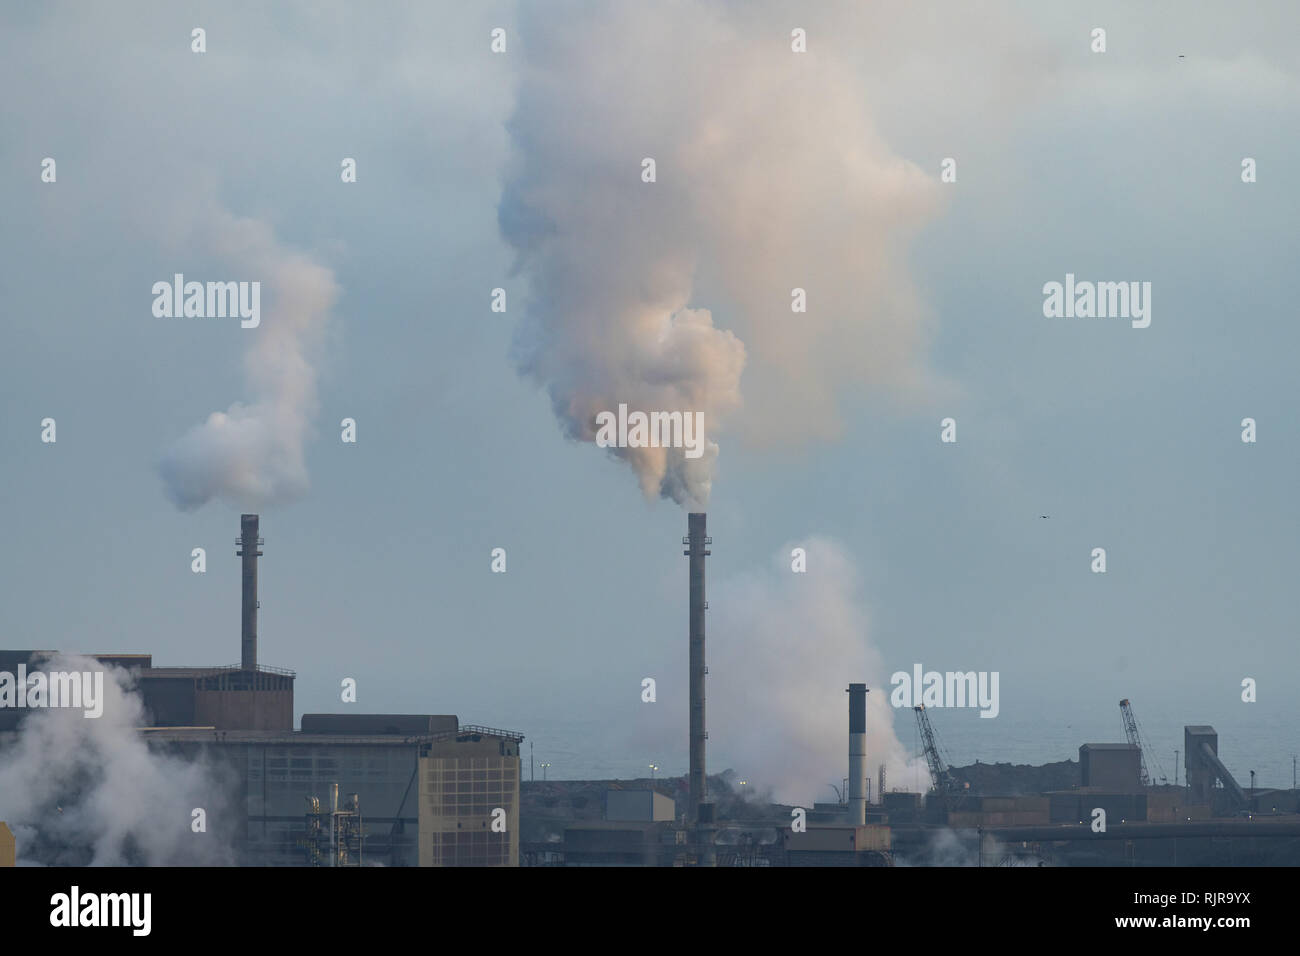 A chimney emitting fumes at Tata Steel steelworks in Port Talbot, Wales, UK. Stock Photo